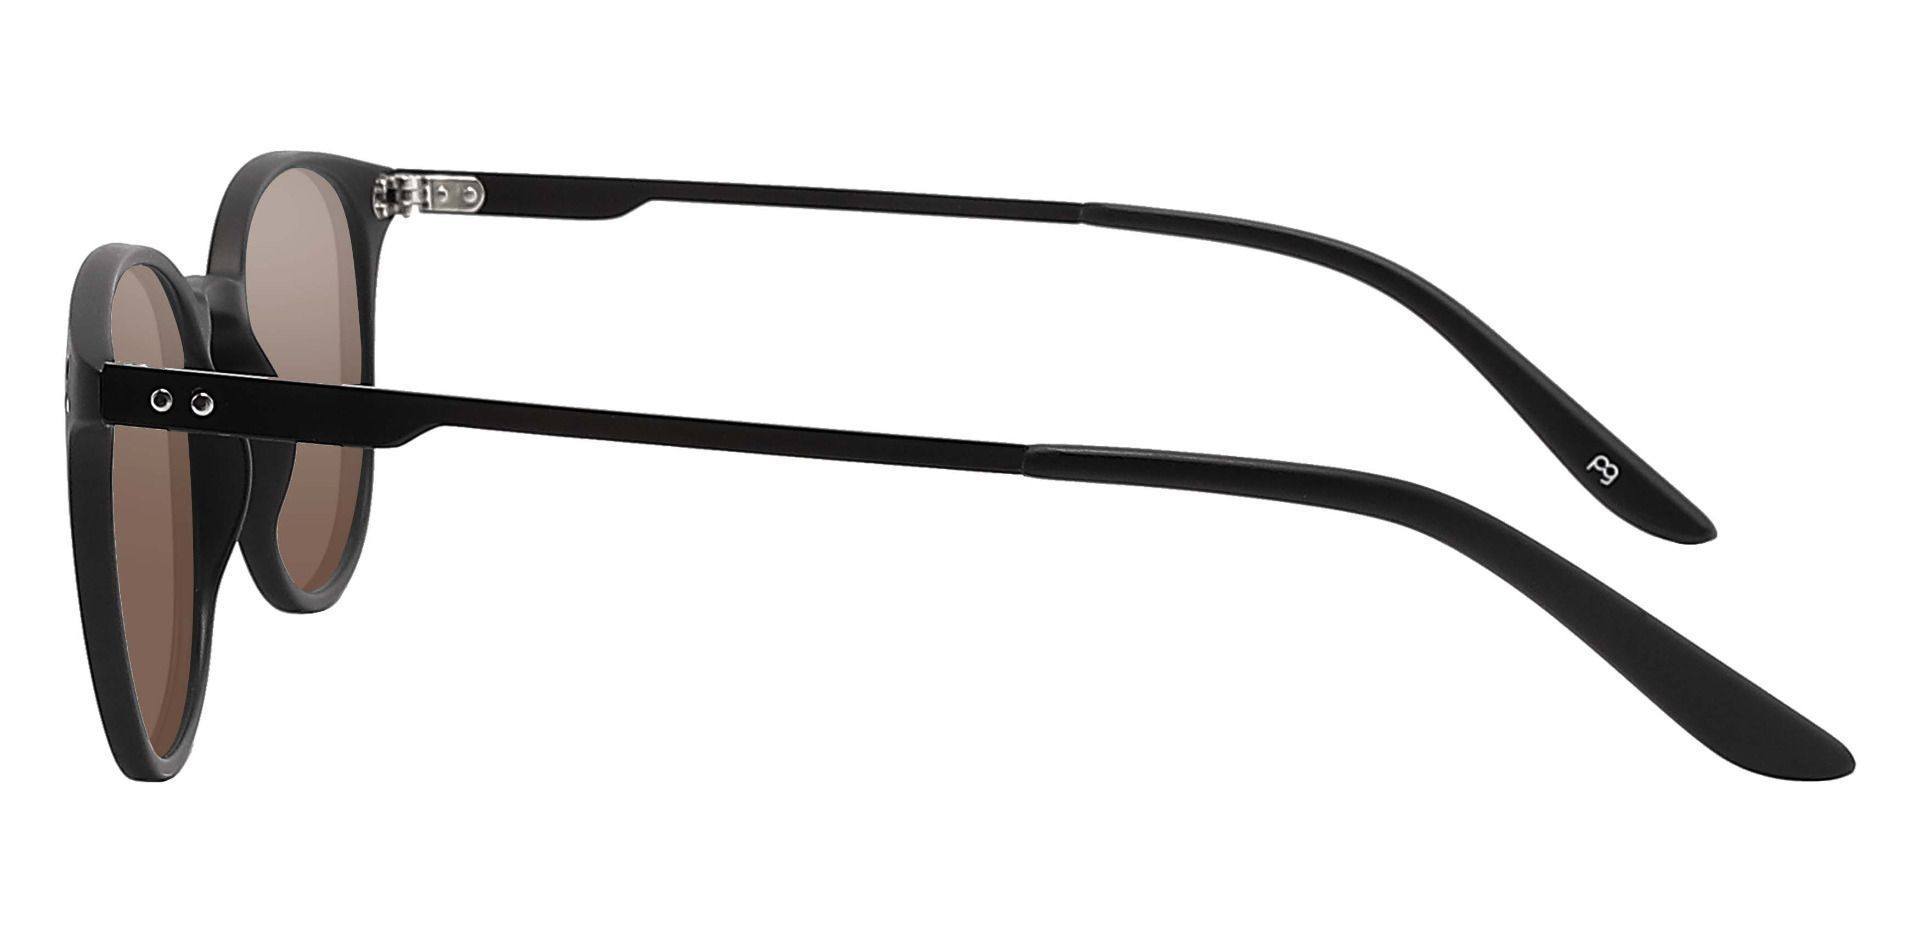 Wales Oval Lined Bifocal Sunglasses - Black Frame With Brown Lenses